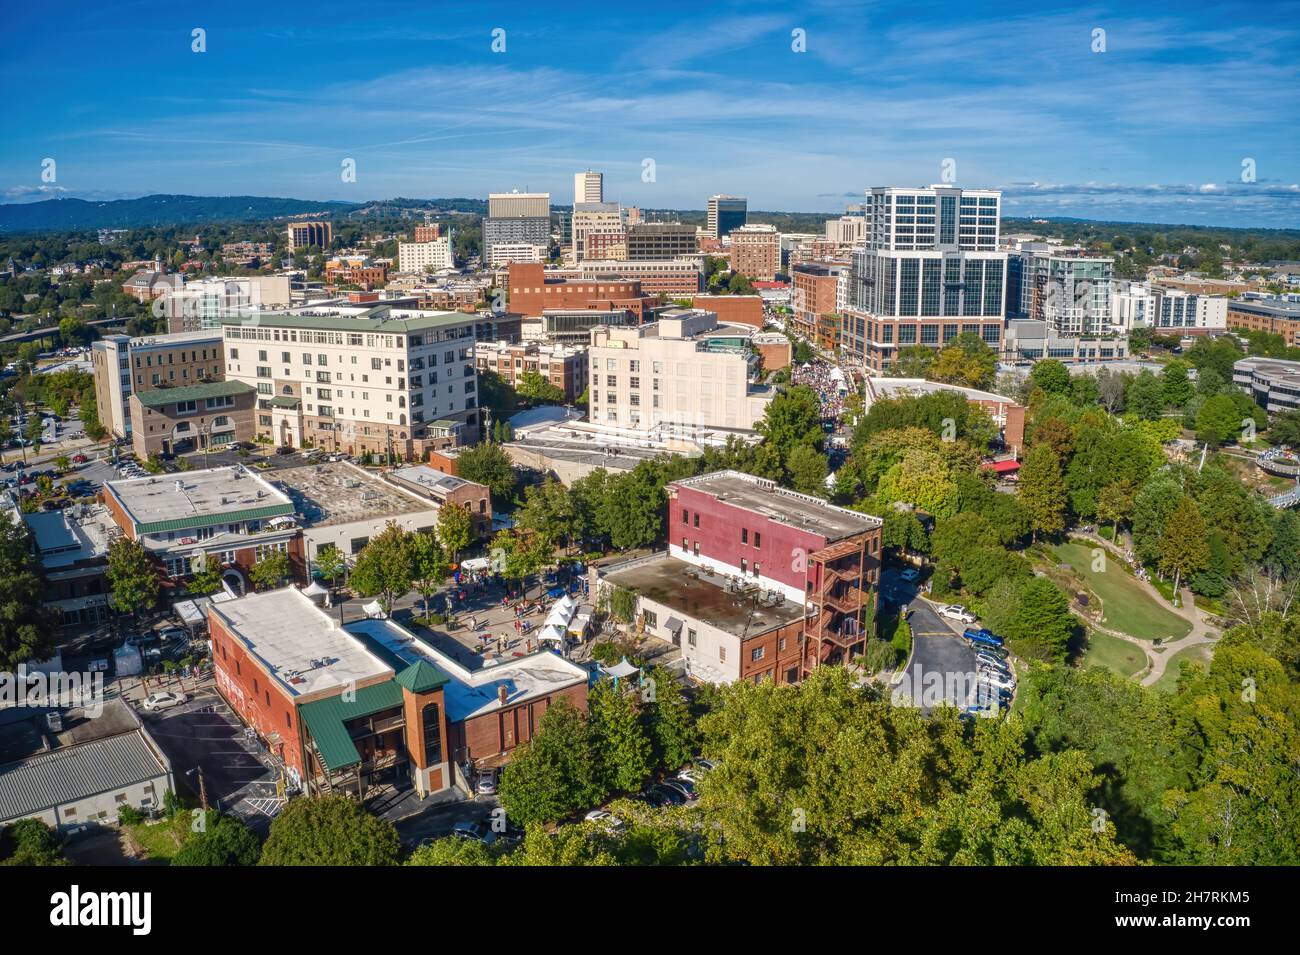 Beautiful aerial view of Greenville under a blue sky in South Carolina Stock Photo